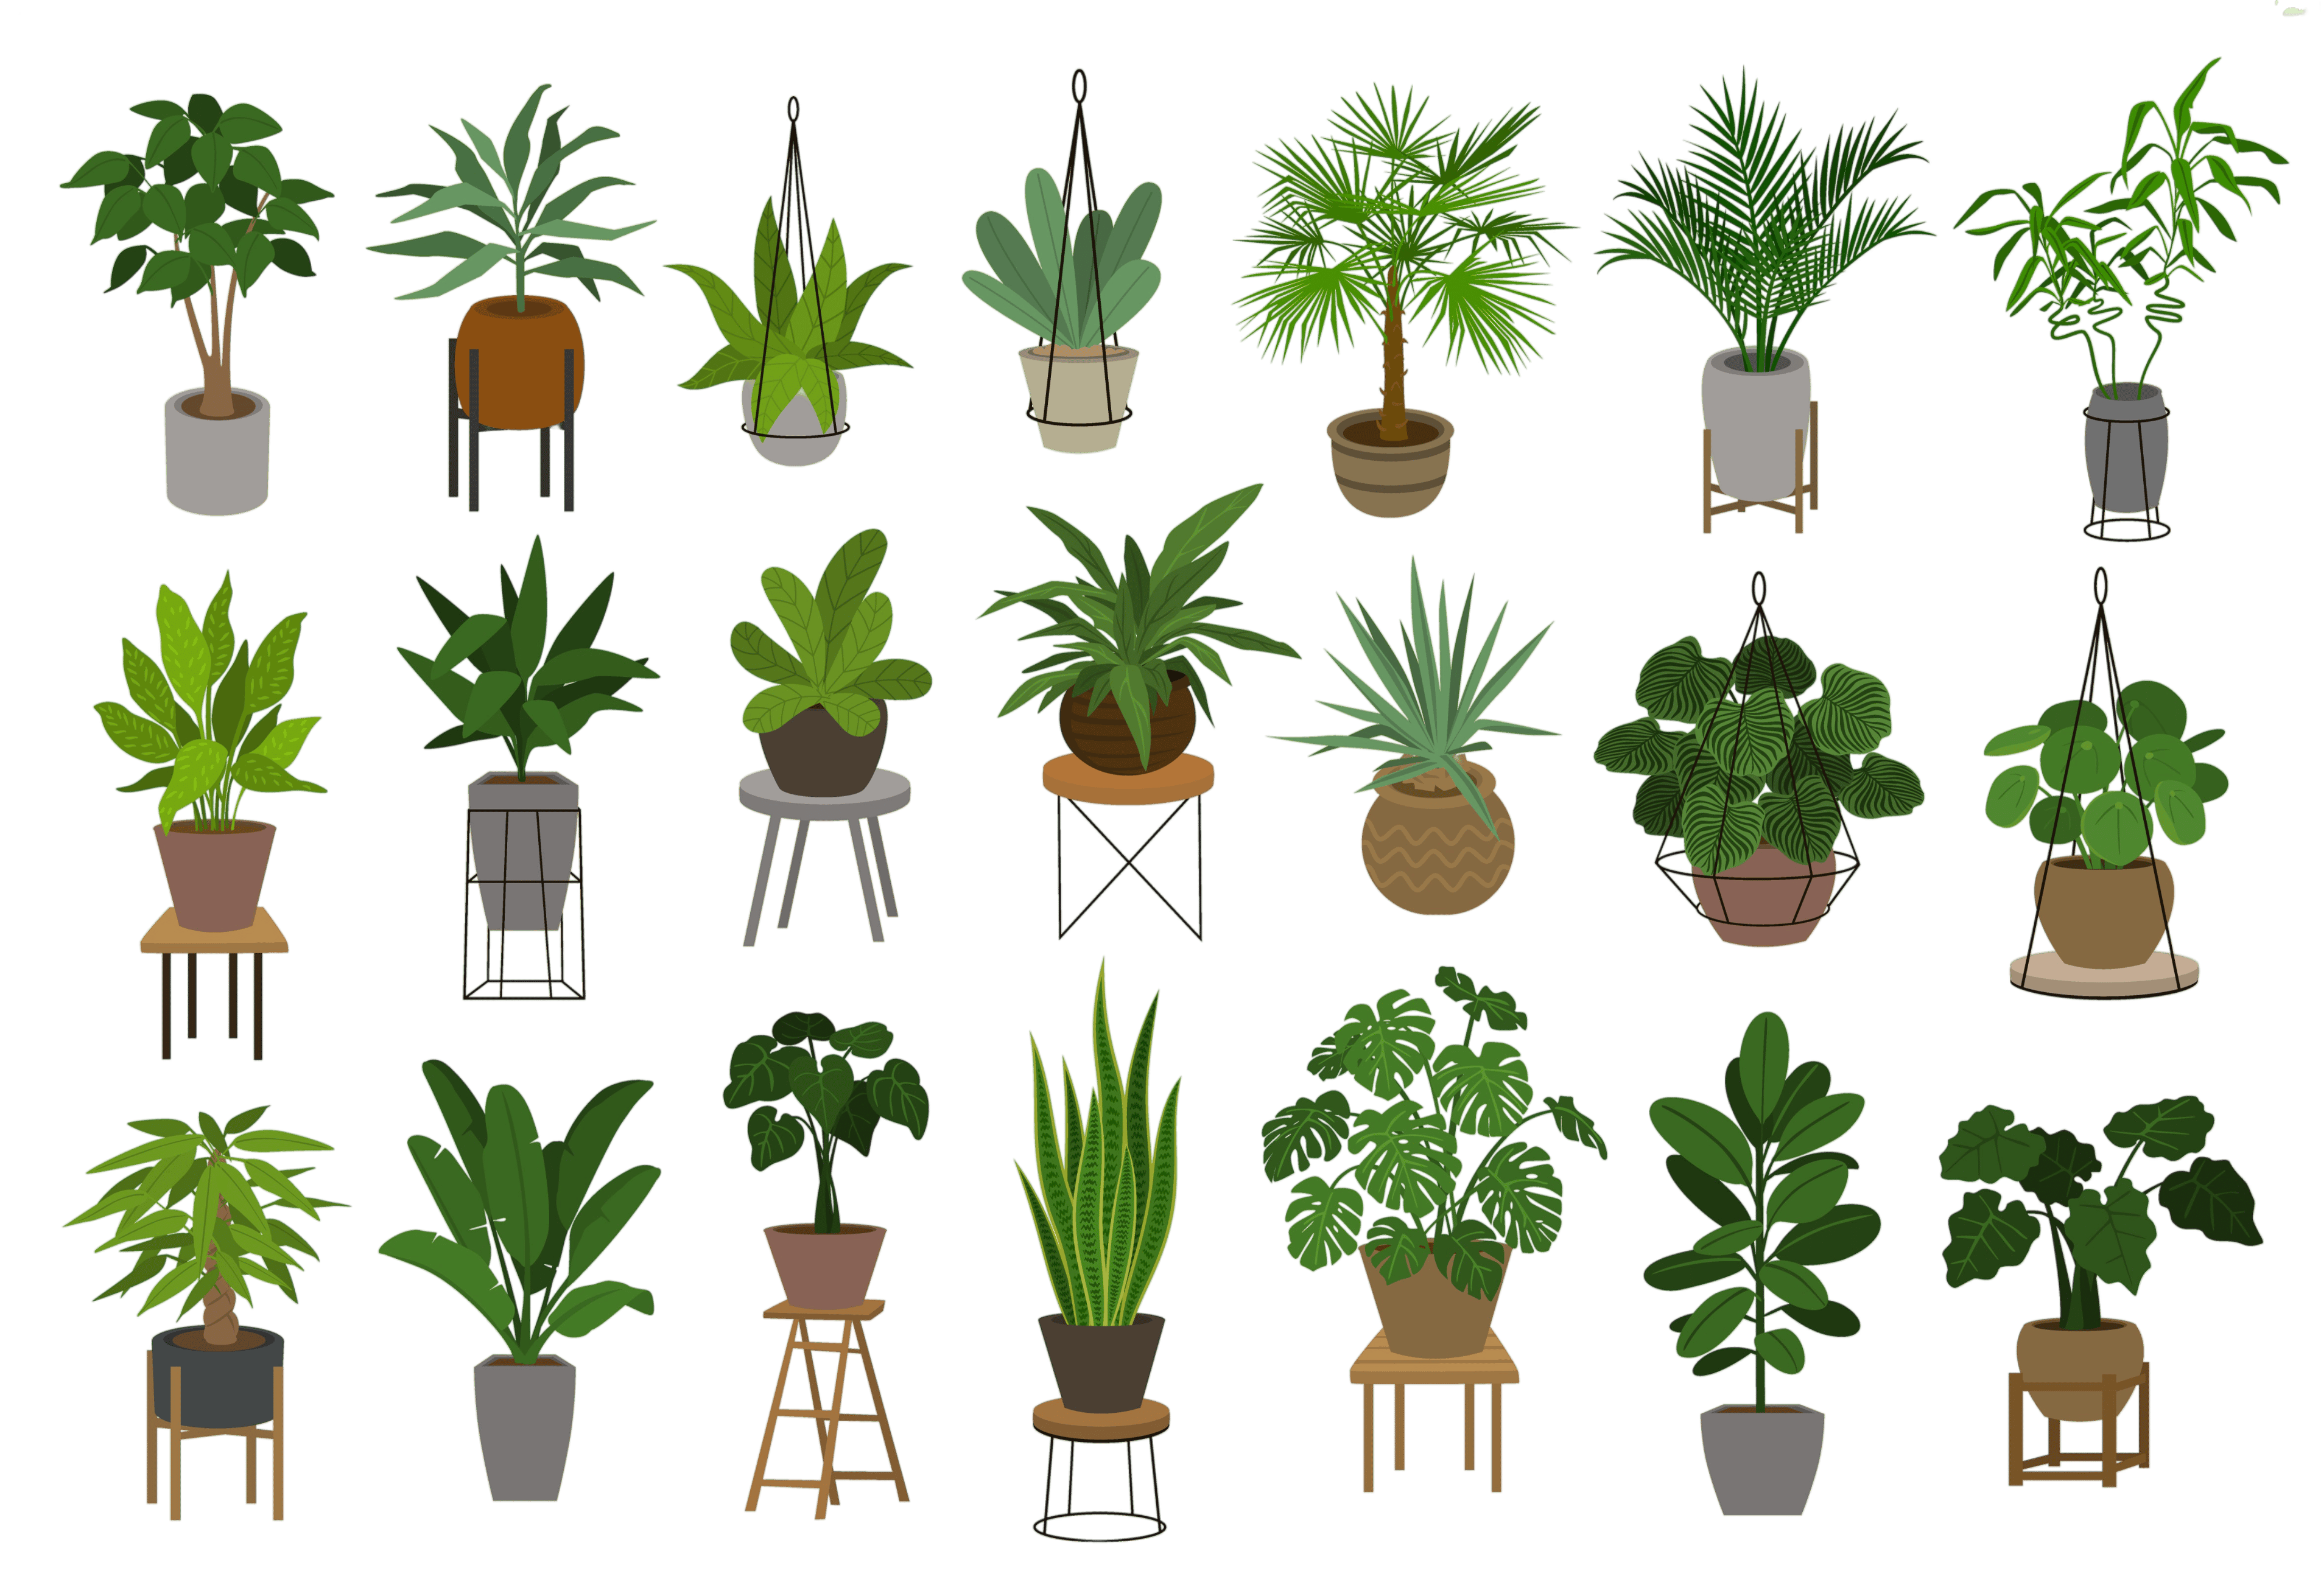 collection of different decor house indoor garden plants in pots and stands graphic set